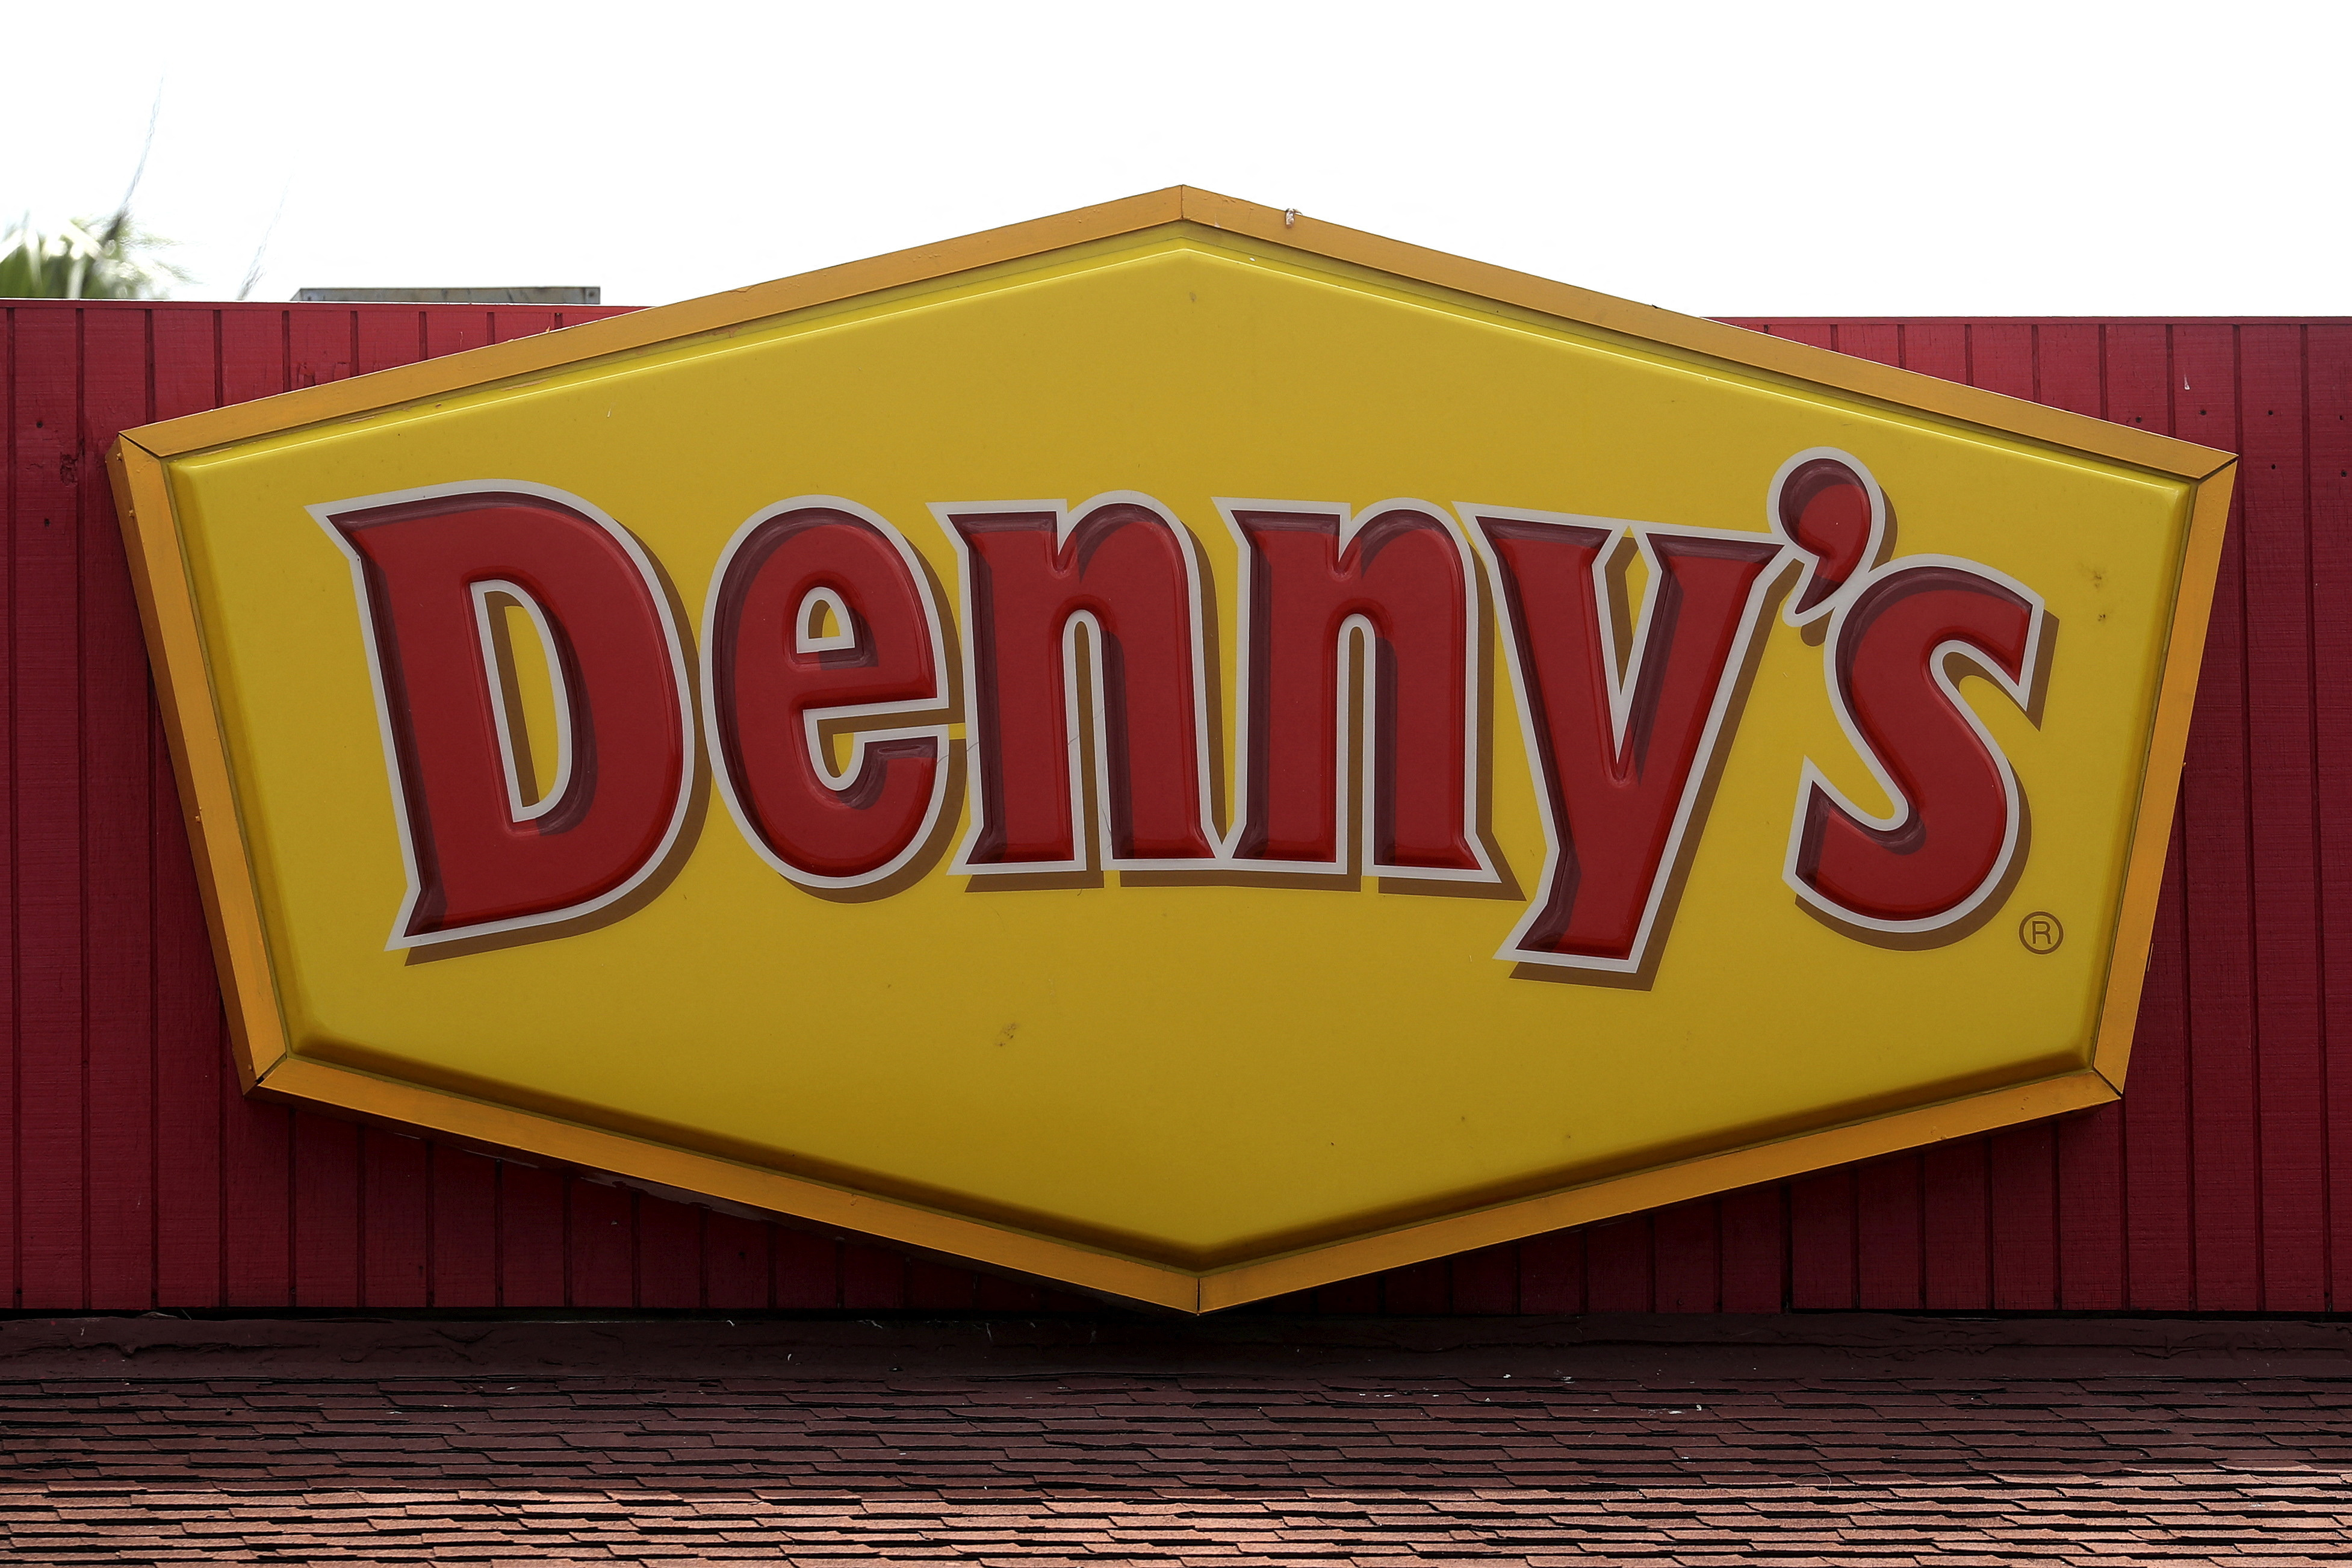 A Denny's restaurant logo is pictured on a building in North Miami, Florida